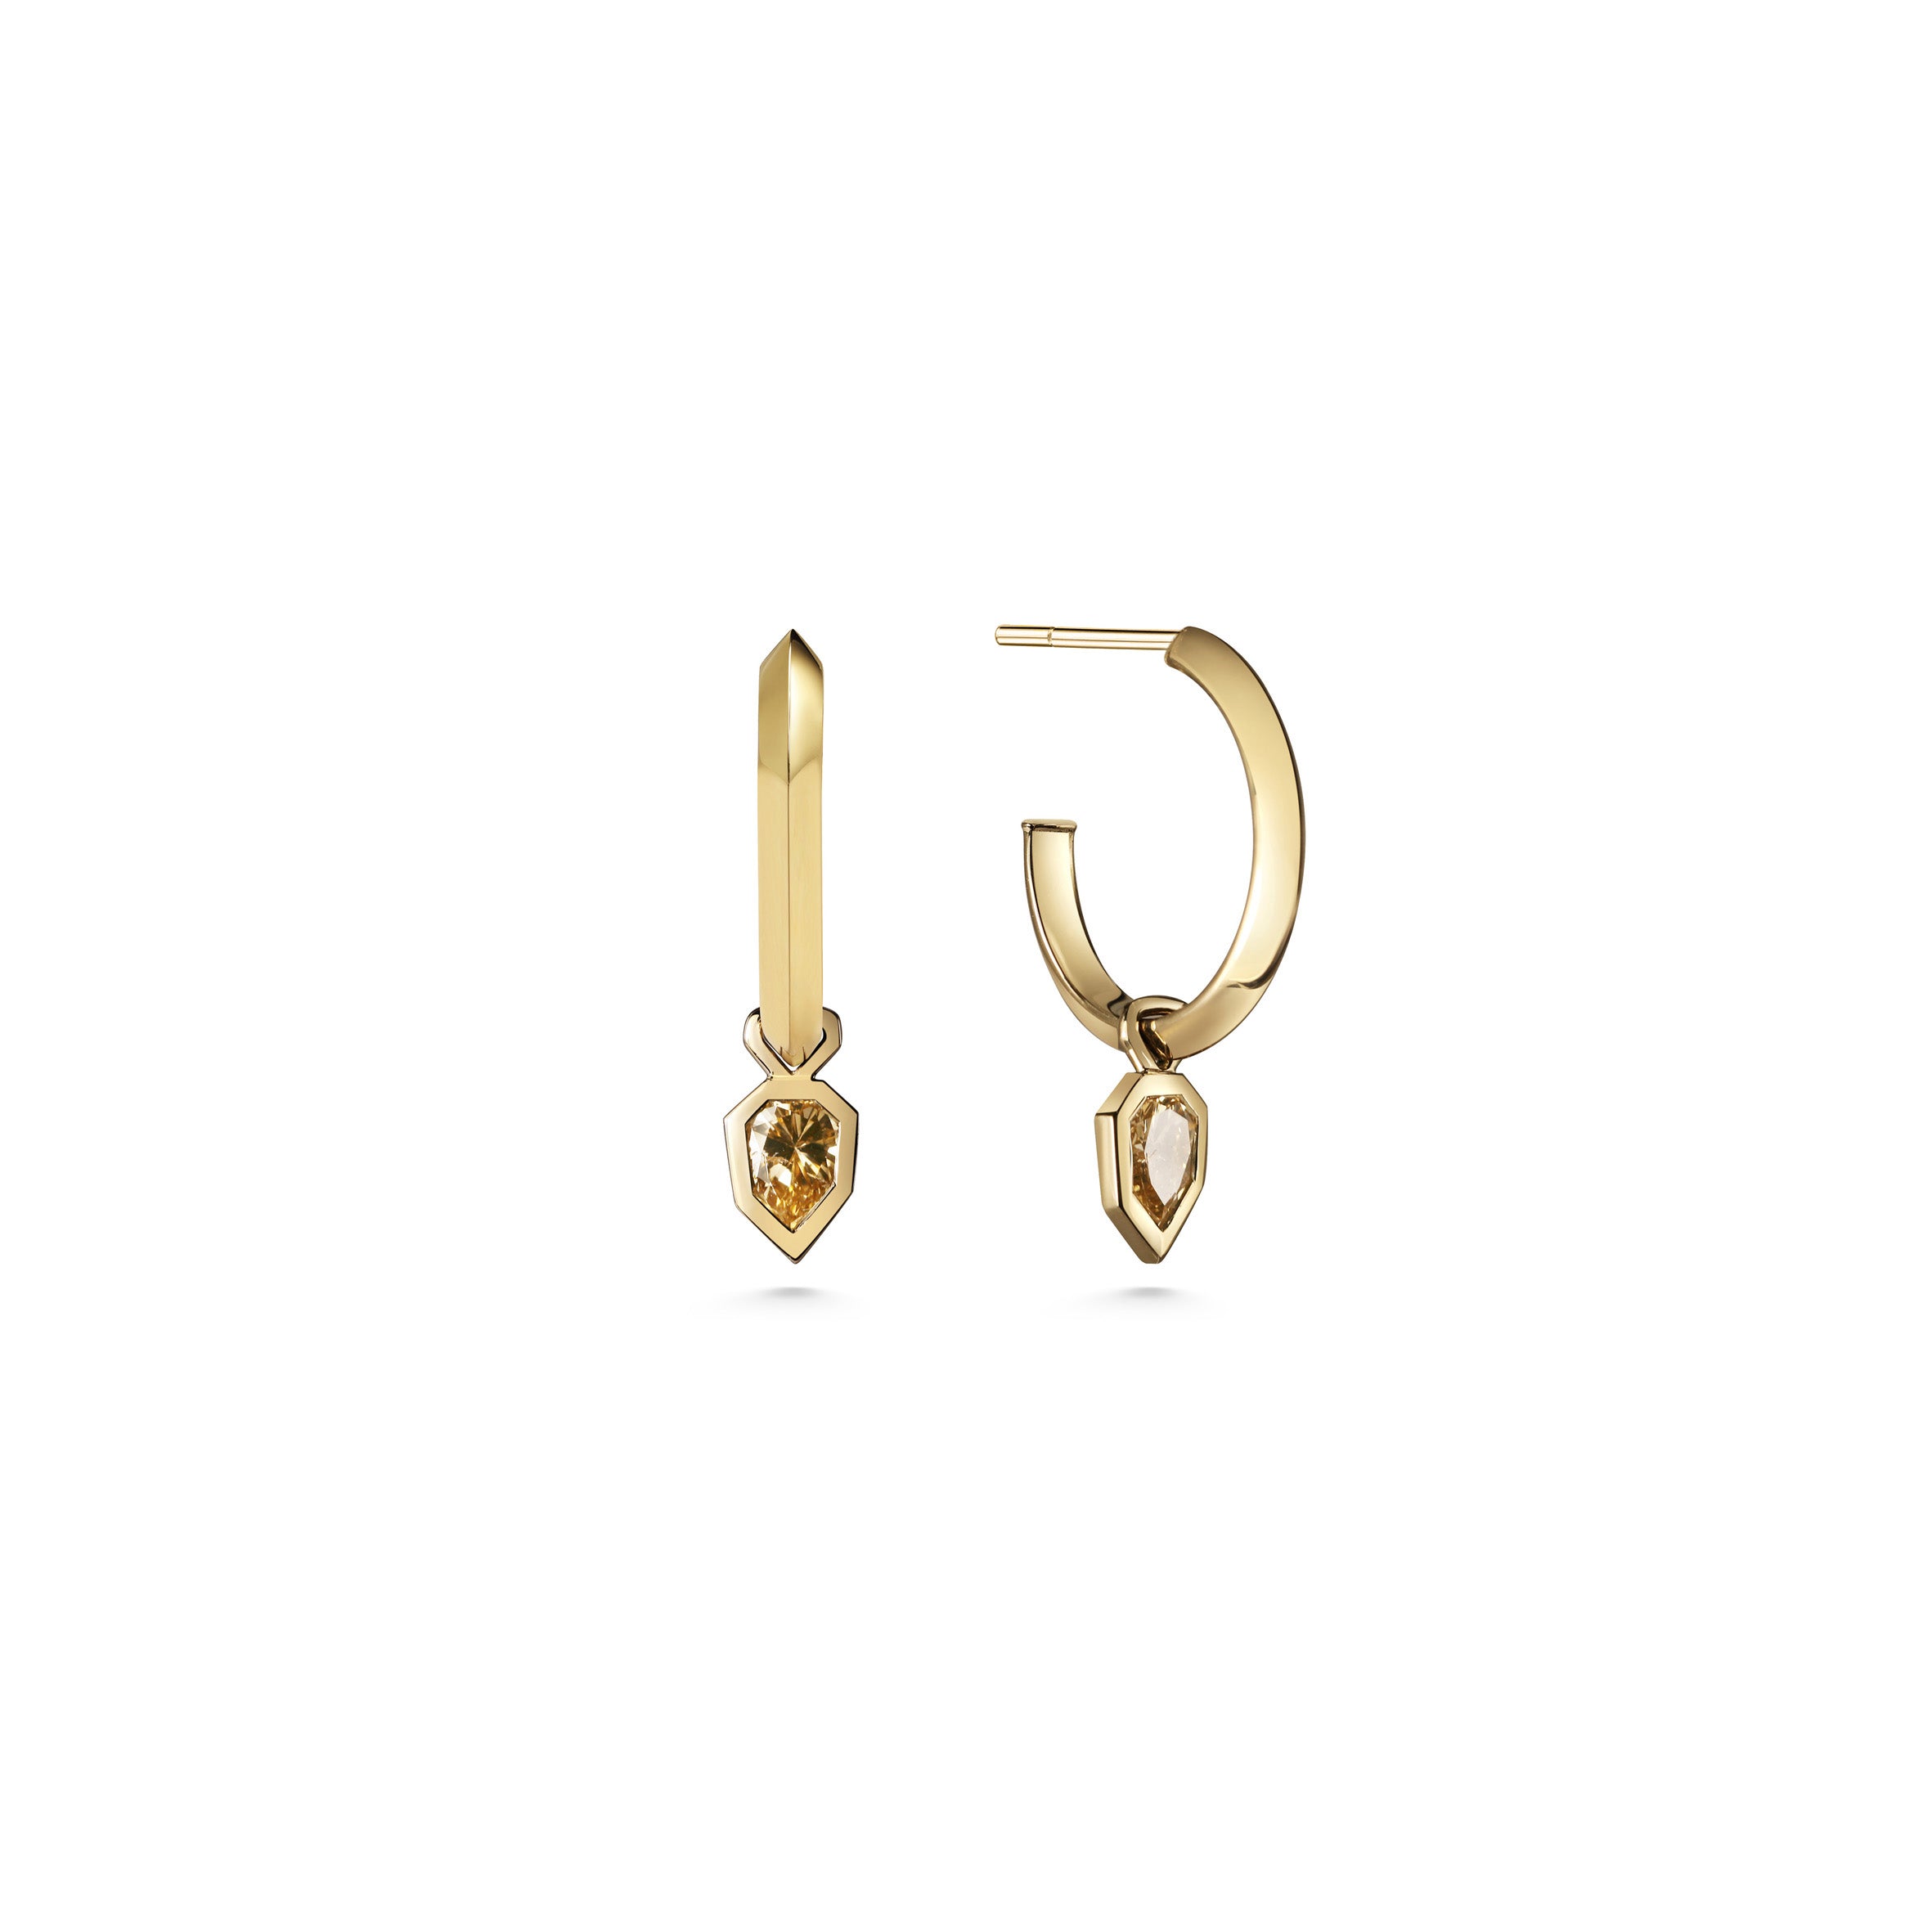 The Vertus Earrings by East London jeweller Rachel Boston | Discover our collections of unique and timeless engagement rings, wedding rings, and modern fine jewellery.